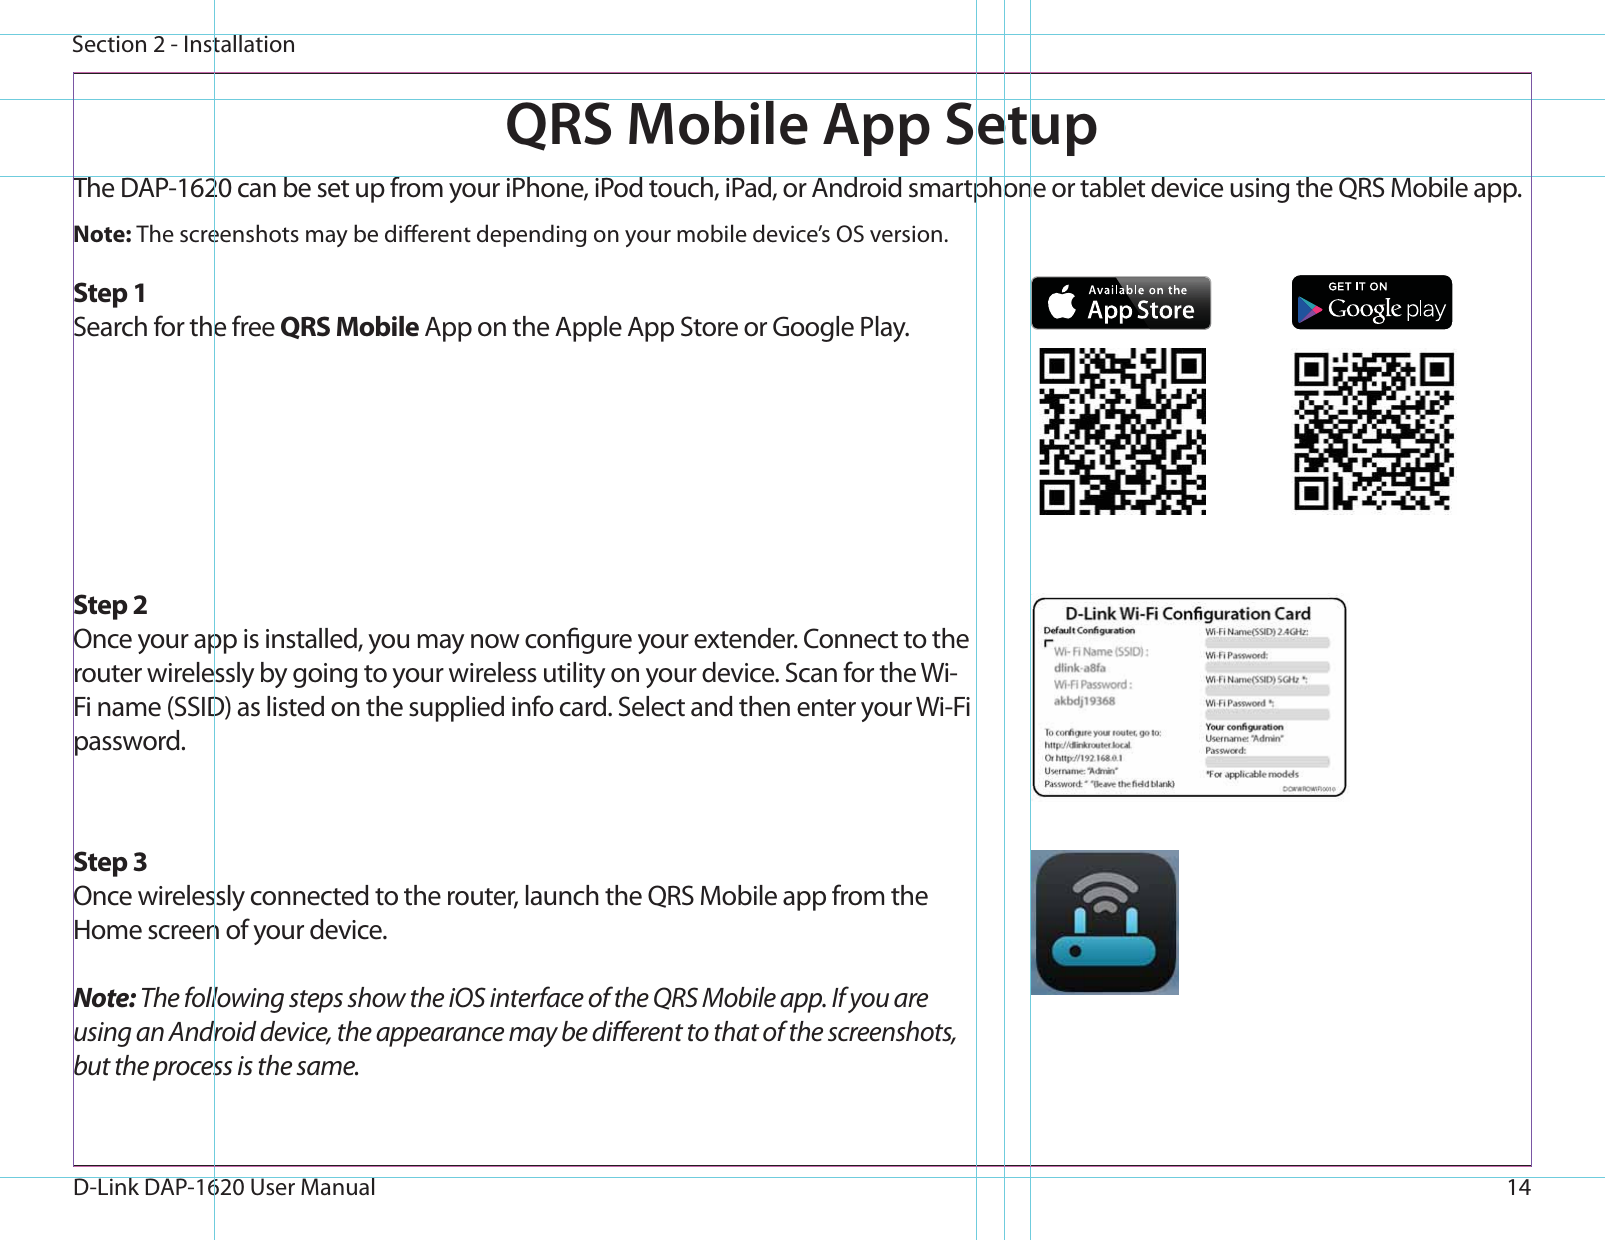 14D-Link DAP-1620 User ManualSection 2 - InstallationQRS Mobile App SetupThe DAP-1620 can be set up from your iPhone, iPod touch, iPad, or Android smartphone or tablet device using the QRS Mobile app.Step 2Once your app is installed, you may now congure your extender. Connect to the router wirelessly by going to your wireless utility on your device. Scan for the Wi-Fi name (SSID) as listed on the supplied info card. Select and then enter your Wi-Fi password.Step 3Once wirelessly connected to the router, launch the QRS Mobile app from the Home screen of your device.Note: The following steps show the iOS interface of the QRS Mobile app. If you are using an Android device, the appearance may be dierent to that of the screenshots, but the process is the same.Step 1Search for the free QRS Mobile App on the Apple App Store or Google Play.Note: The screenshots may be dierent depending on your mobile device’s OS version.